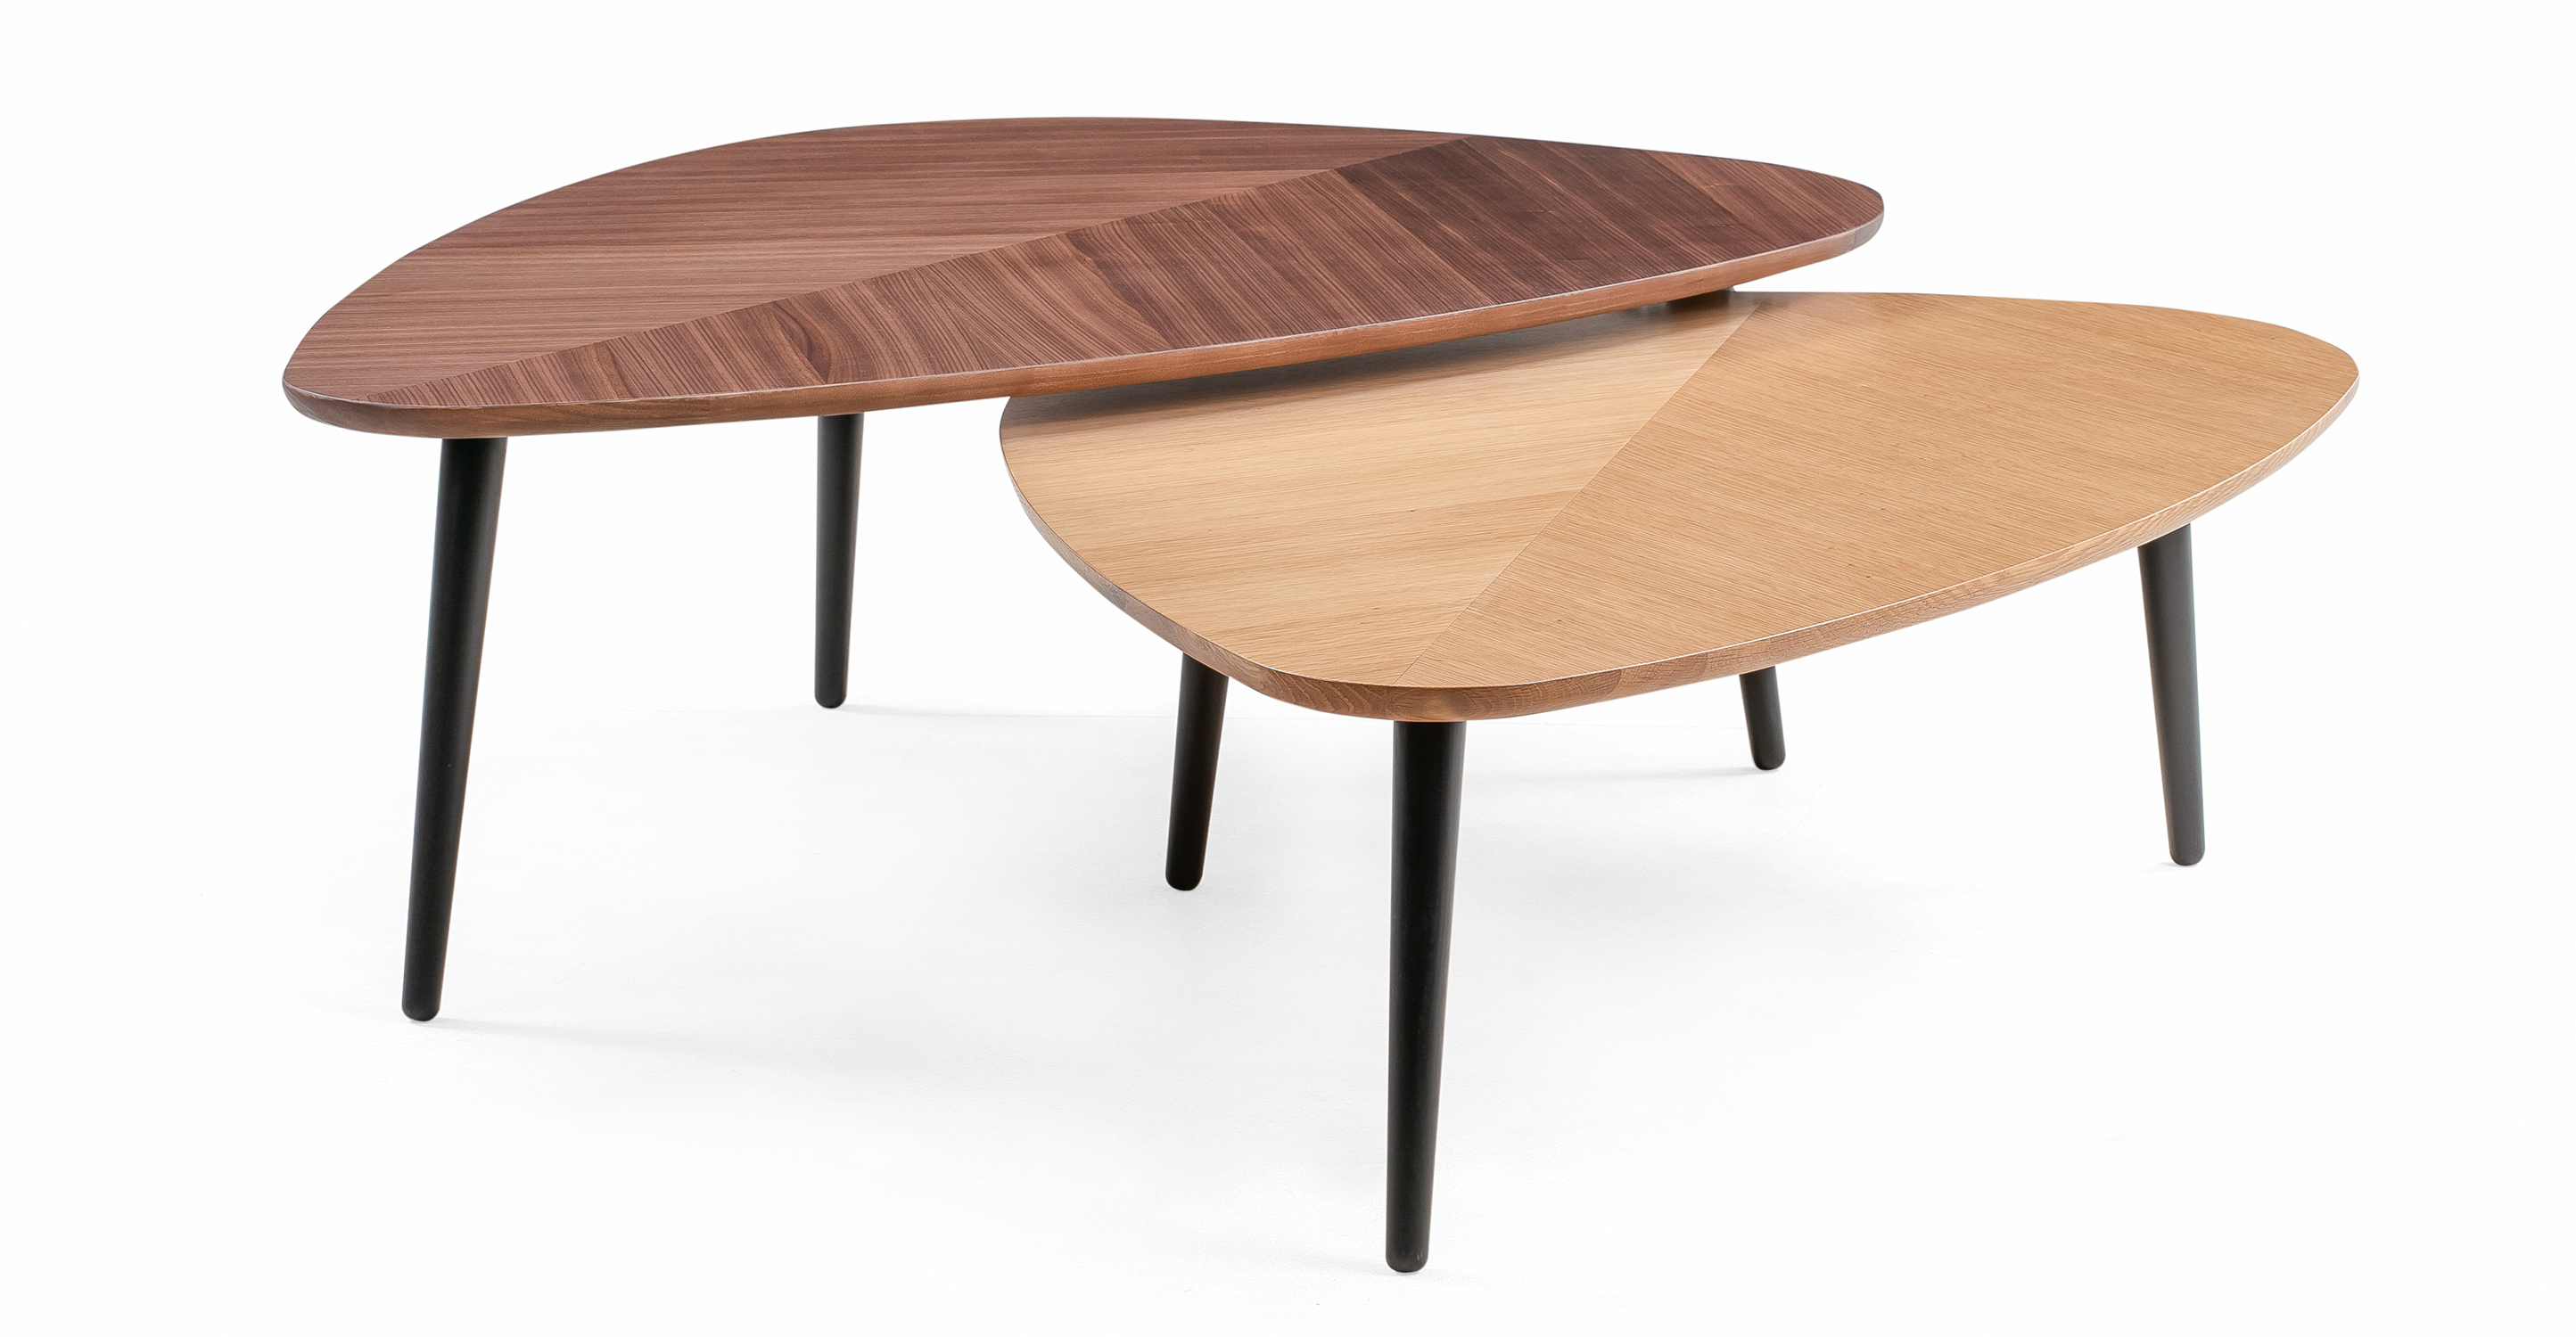 The leaf coffee table has three black wooden Wegner style legs. The table is wider at the back and then narrows towards the front taking on the shape of a leaf. The wood grain pattern meets on the middle of the table and moves outward toward the edge of the table, mimicking a leaf pattern. This set can be nested together as one table is taller than the other or used separately. On table is oak and the other is walnut.